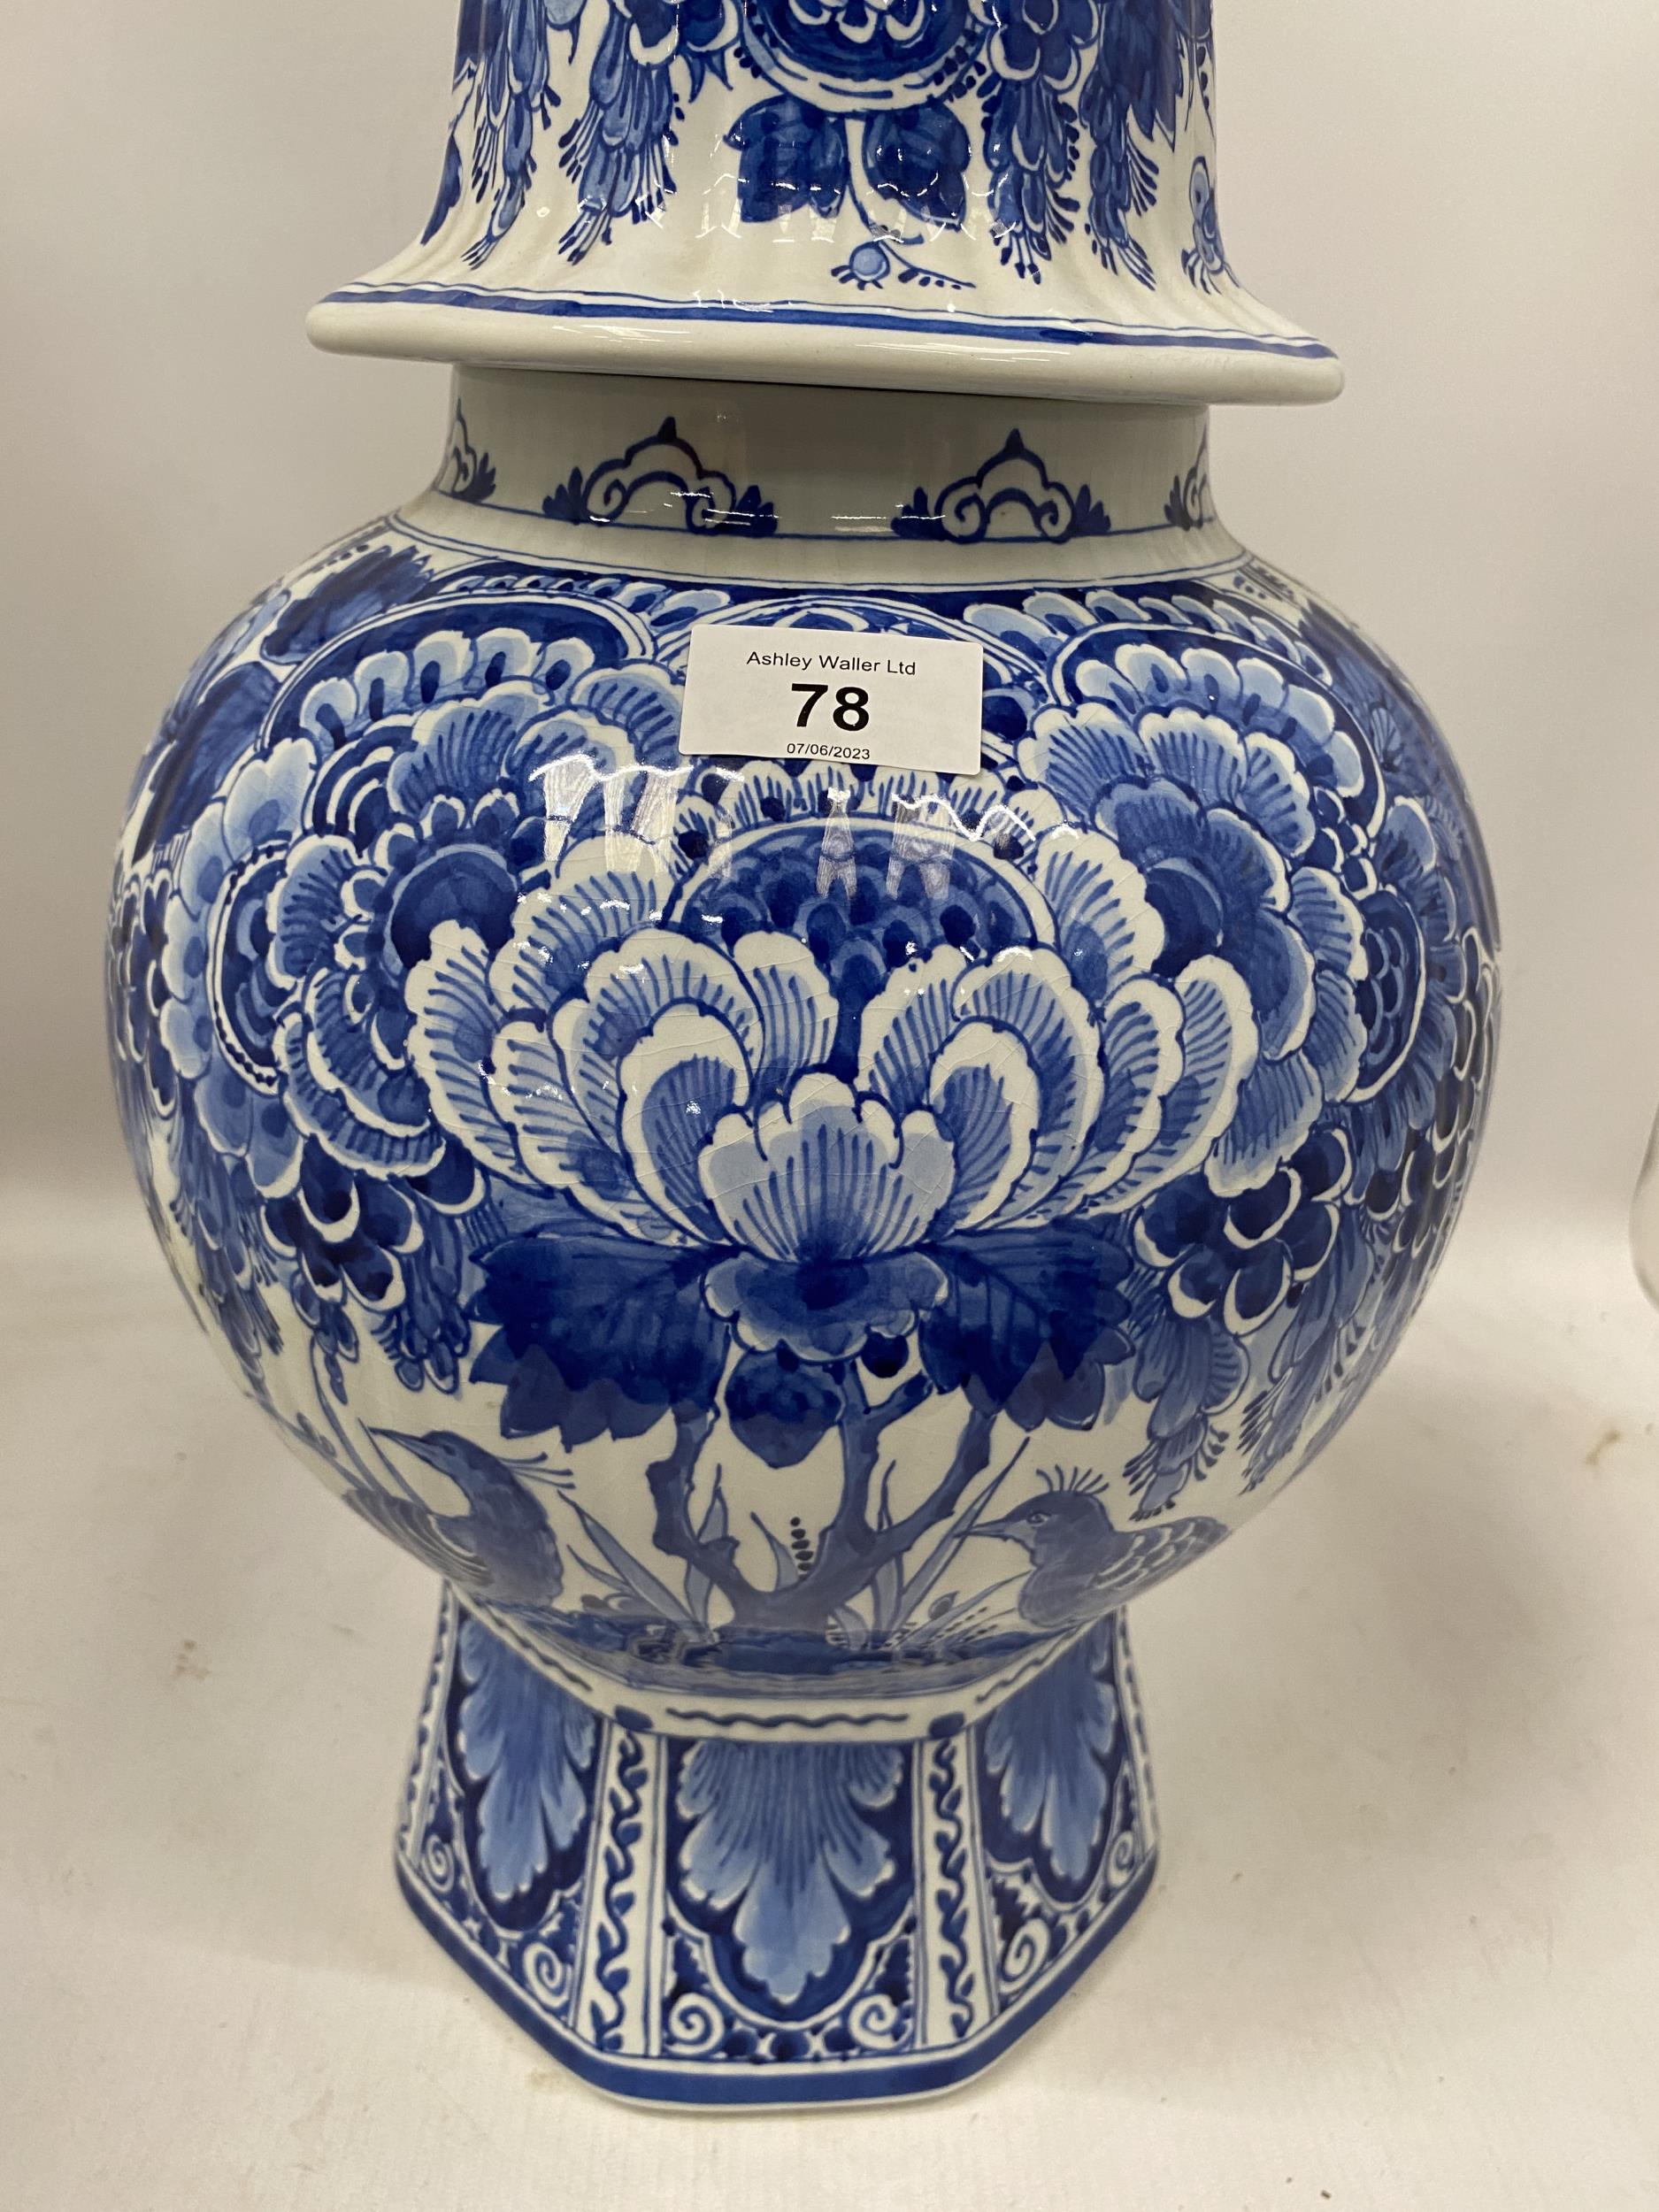 A LARGE DUTCH DELFT POTTRY LIDDED TEMPLE JAR / URN, HEIGHT 49CM - Image 2 of 3